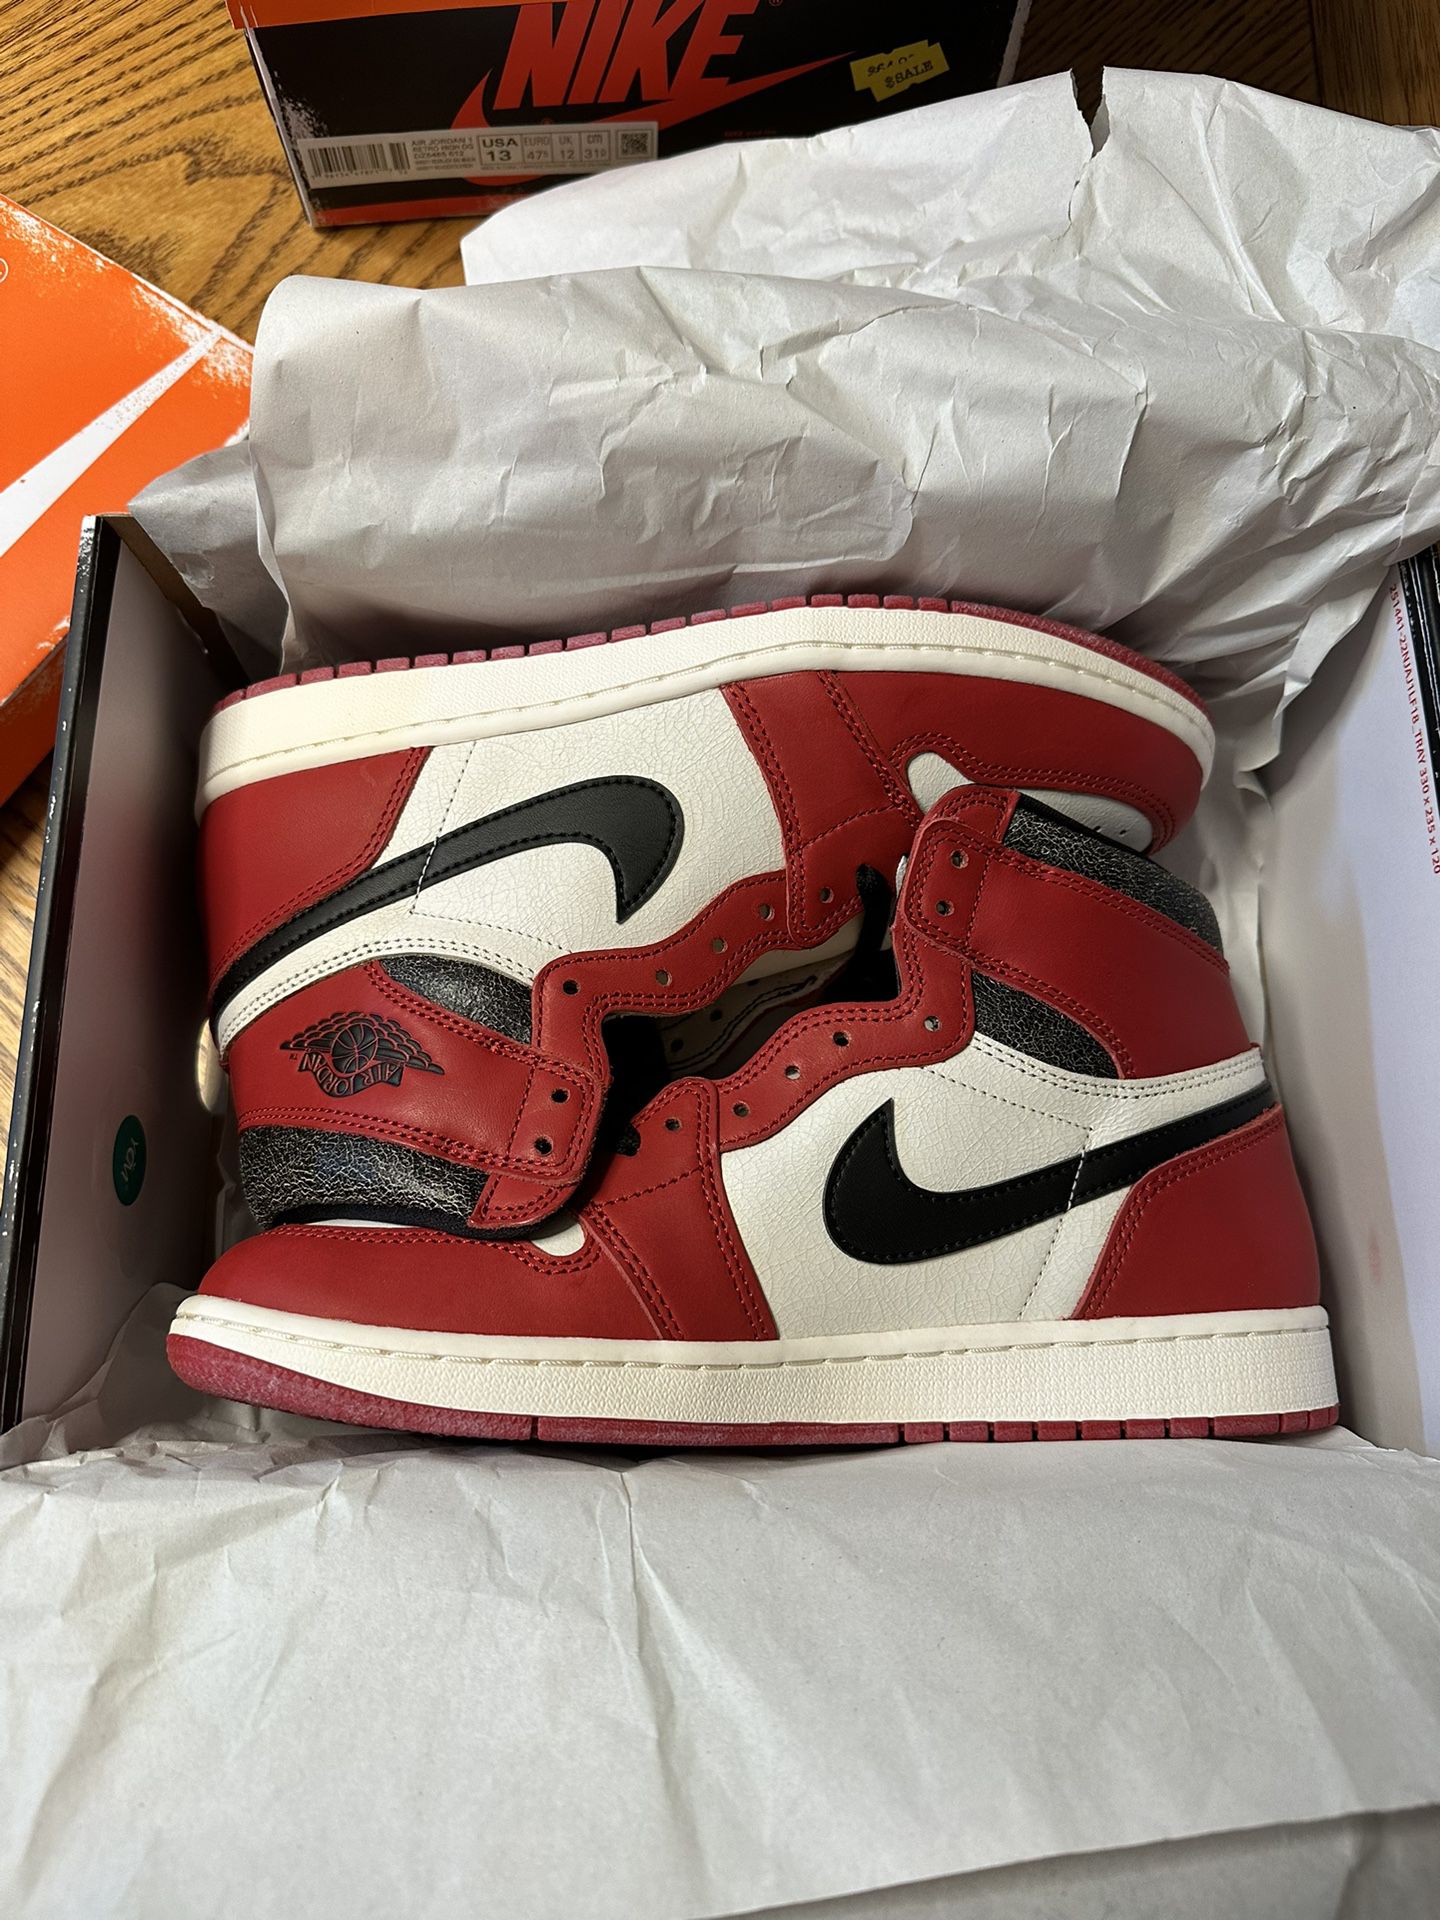 Jordan 1 Lost And Found Sizes 10/11.5/13